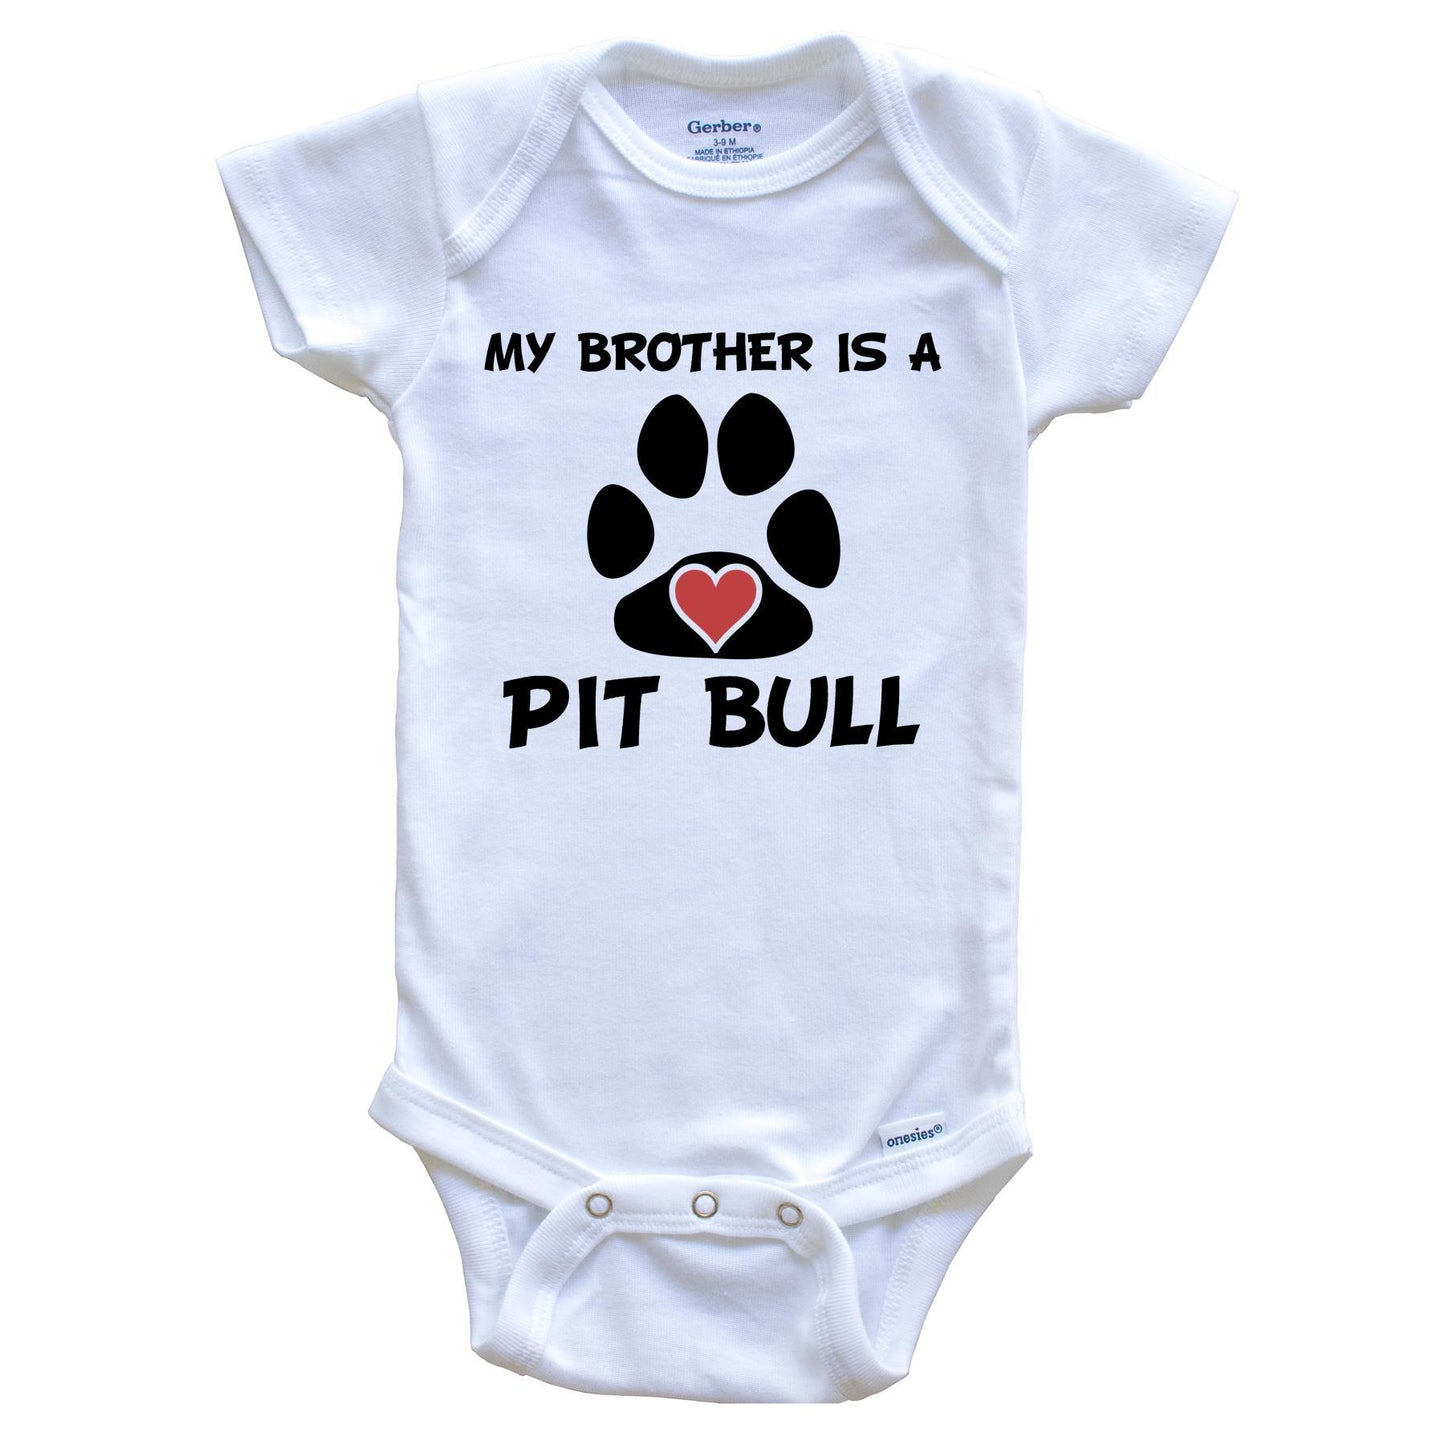 My Brother Is A Pit Bull Baby Onesie